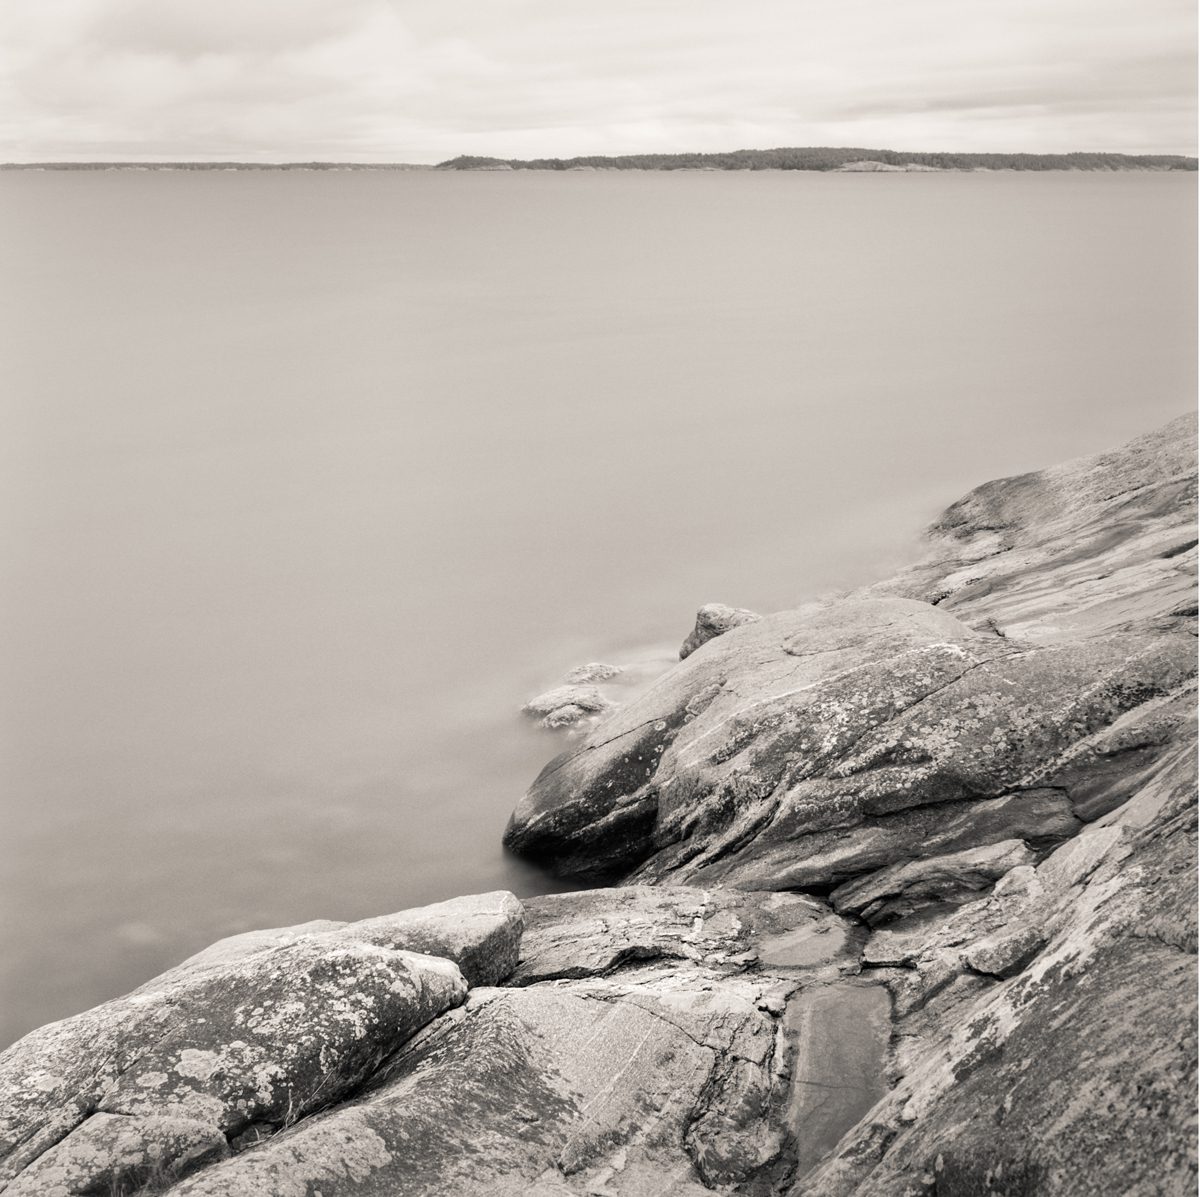 Image in black and white of rocks in or around the sea